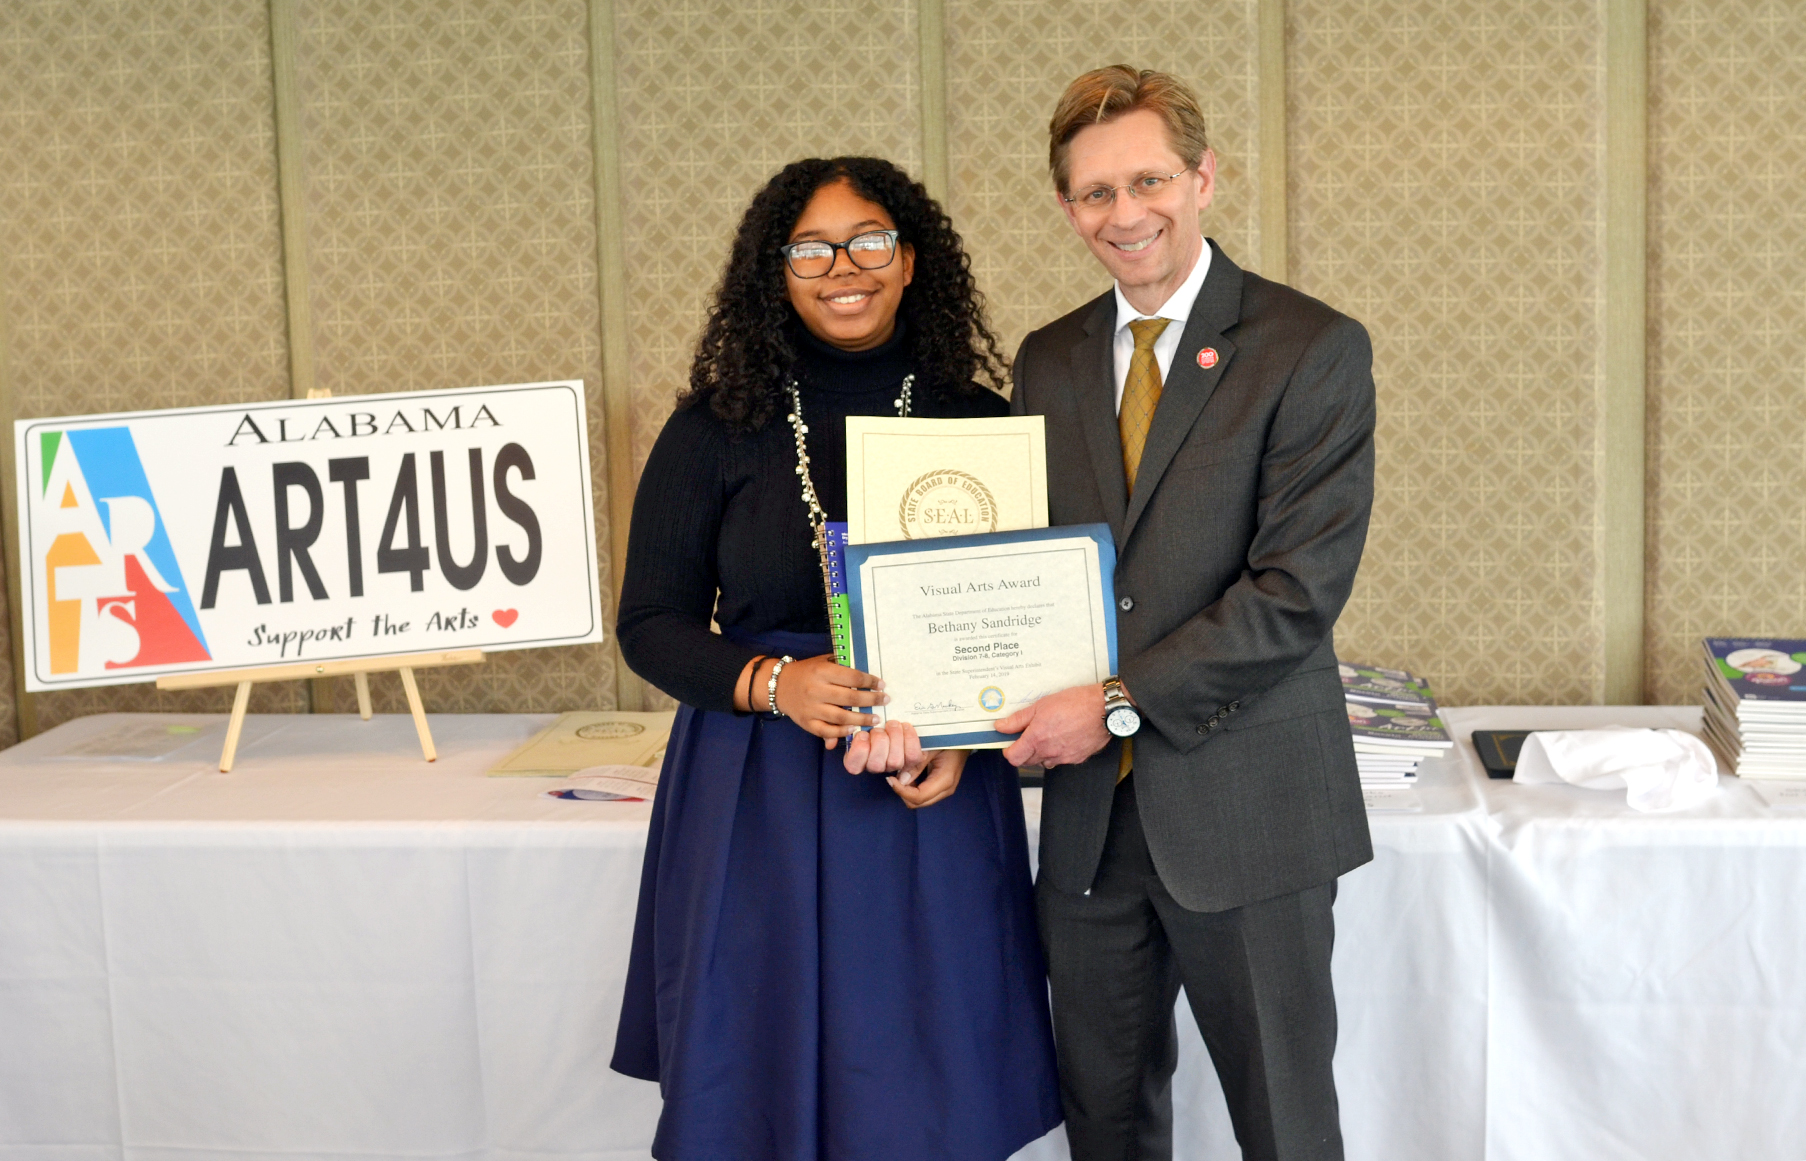 Student receiving award with State Superintendent of Education Eric Mackey